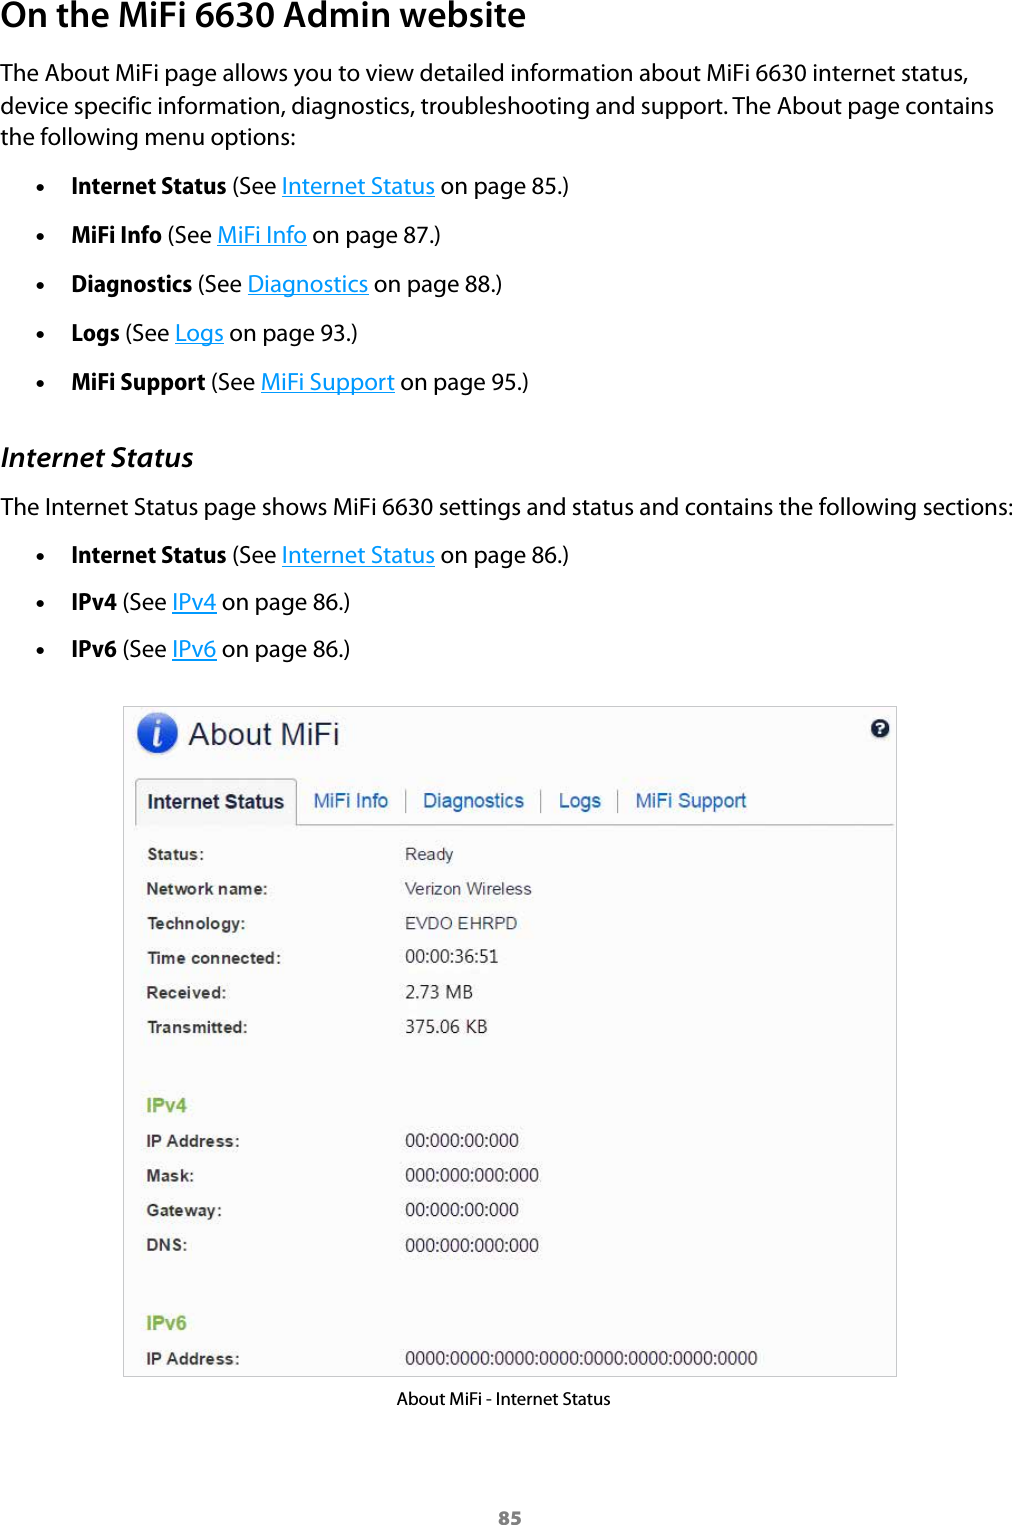 85On the MiFi 6630 Admin websiteThe About MiFi page allows you to view detailed information about MiFi 6630 internet status, device specific information, diagnostics, troubleshooting and support. The About page contains the following menu options: •Internet Status (See Internet Status on page 85.) •MiFi Info (See MiFi Info on page 87.) •Diagnostics (See Diagnostics on page 88.) •Logs (See Logs on page 93.) •MiFi Support (See MiFi Support on page 95.)Internet StatusThe Internet Status page shows MiFi 6630 settings and status and contains the following sections: •Internet Status (See Internet Status on page 86.) •IPv4 (See IPv4 on page 86.) •IPv6 (See IPv6 on page 86.)About MiFi - Internet Status